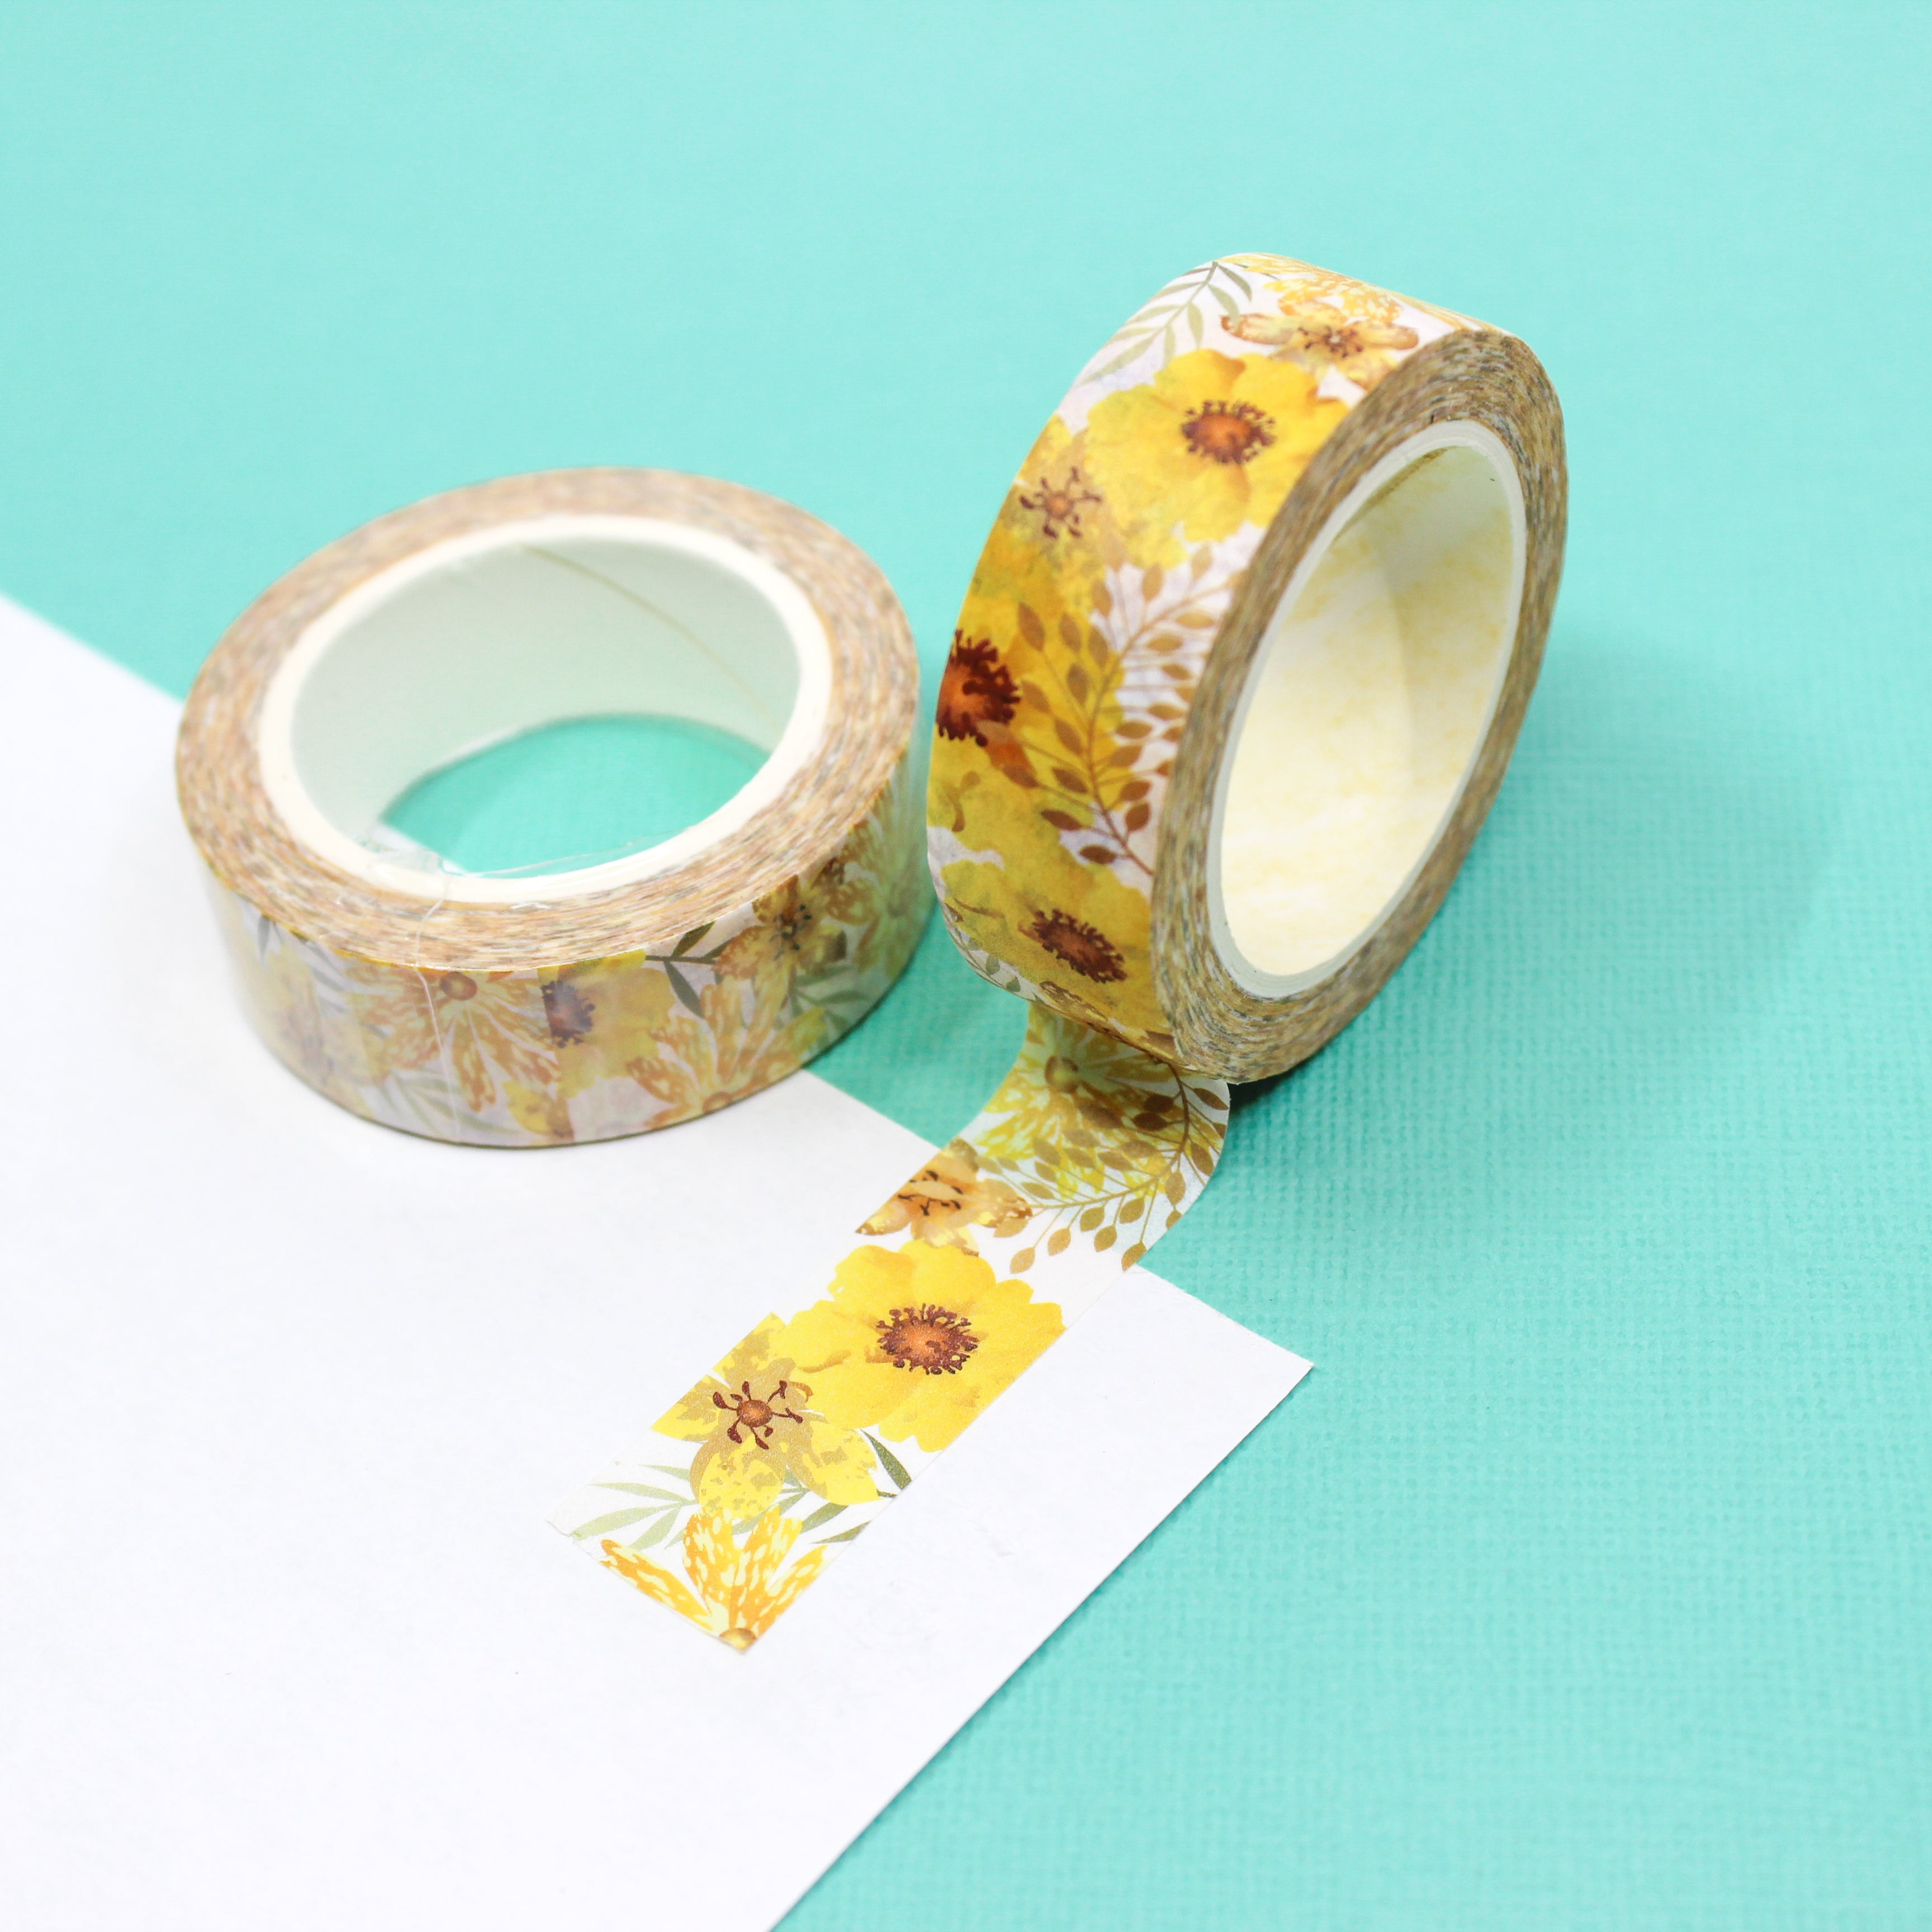 Add a touch of nature's beauty to your crafts with our floral washi tape, featuring elegant floral designs in a variety of colors, perfect for creating graceful and artistic accents. This tape is sold at BBB Supplies Craft Shop.